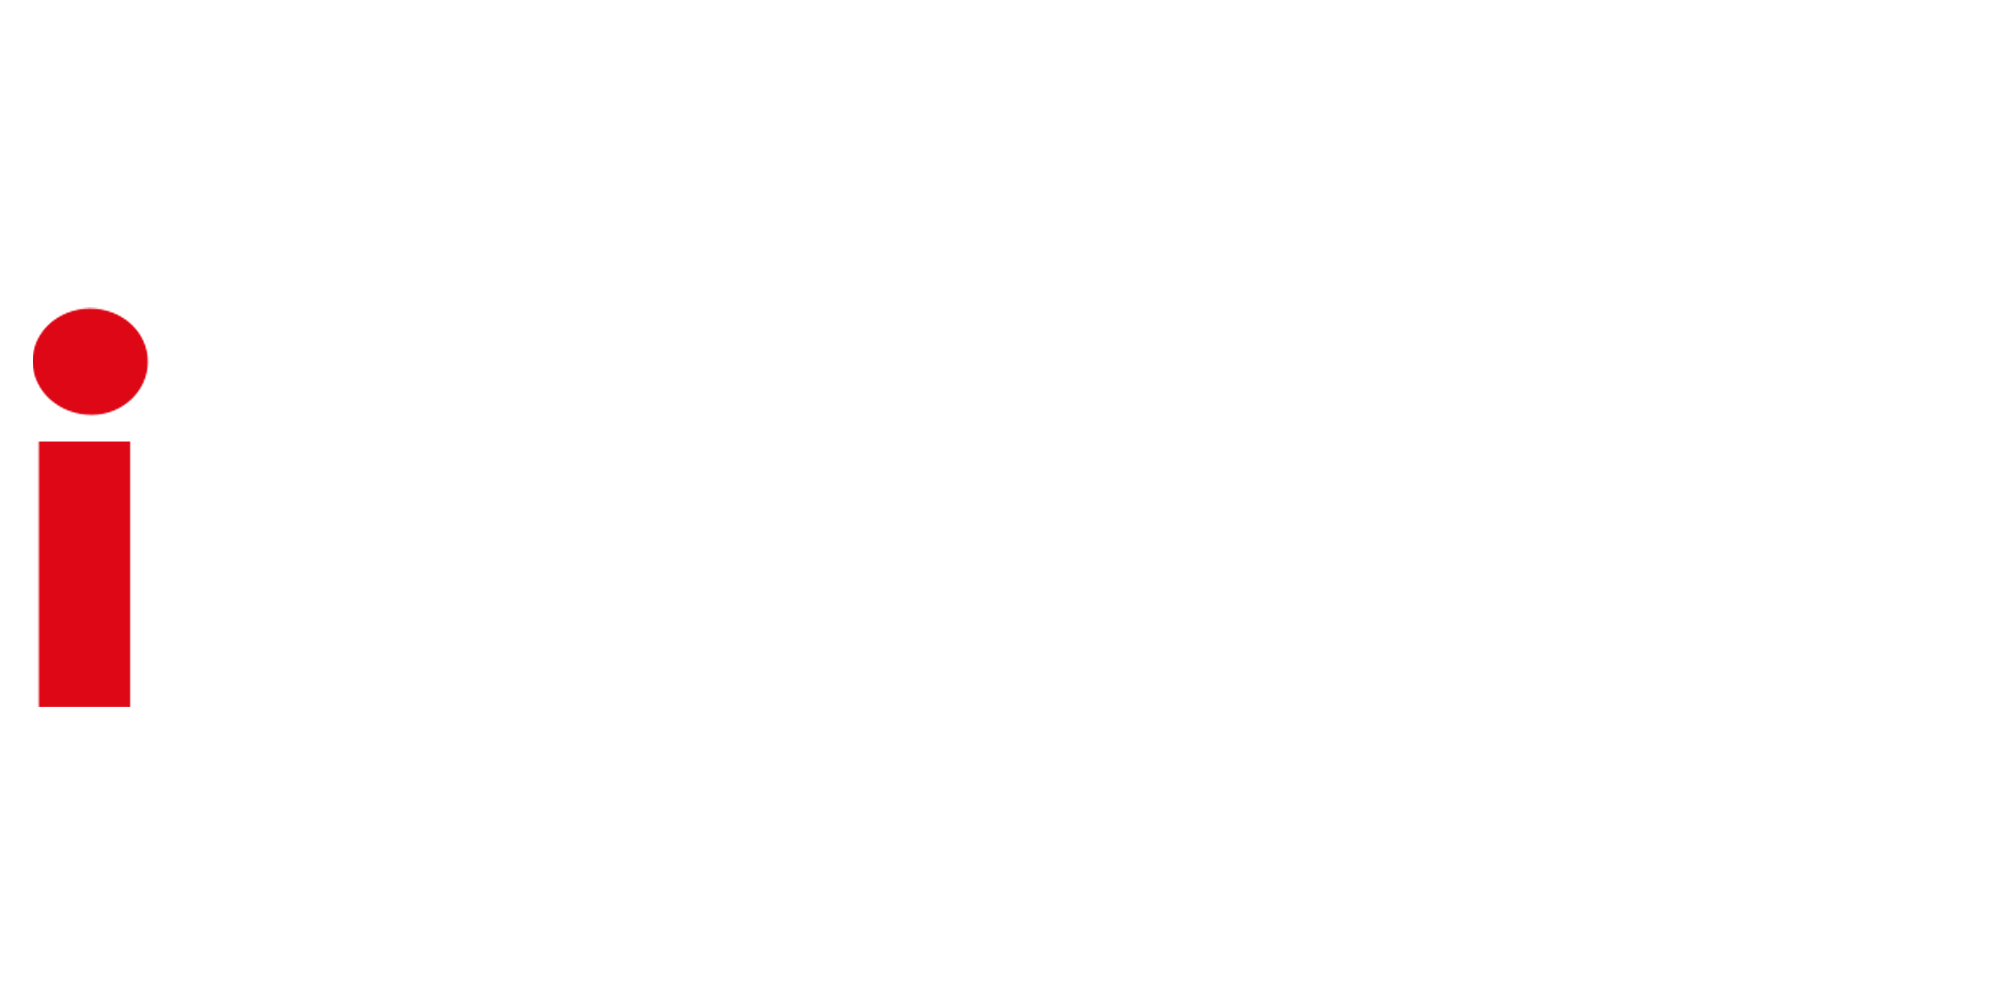 Iscooter logo